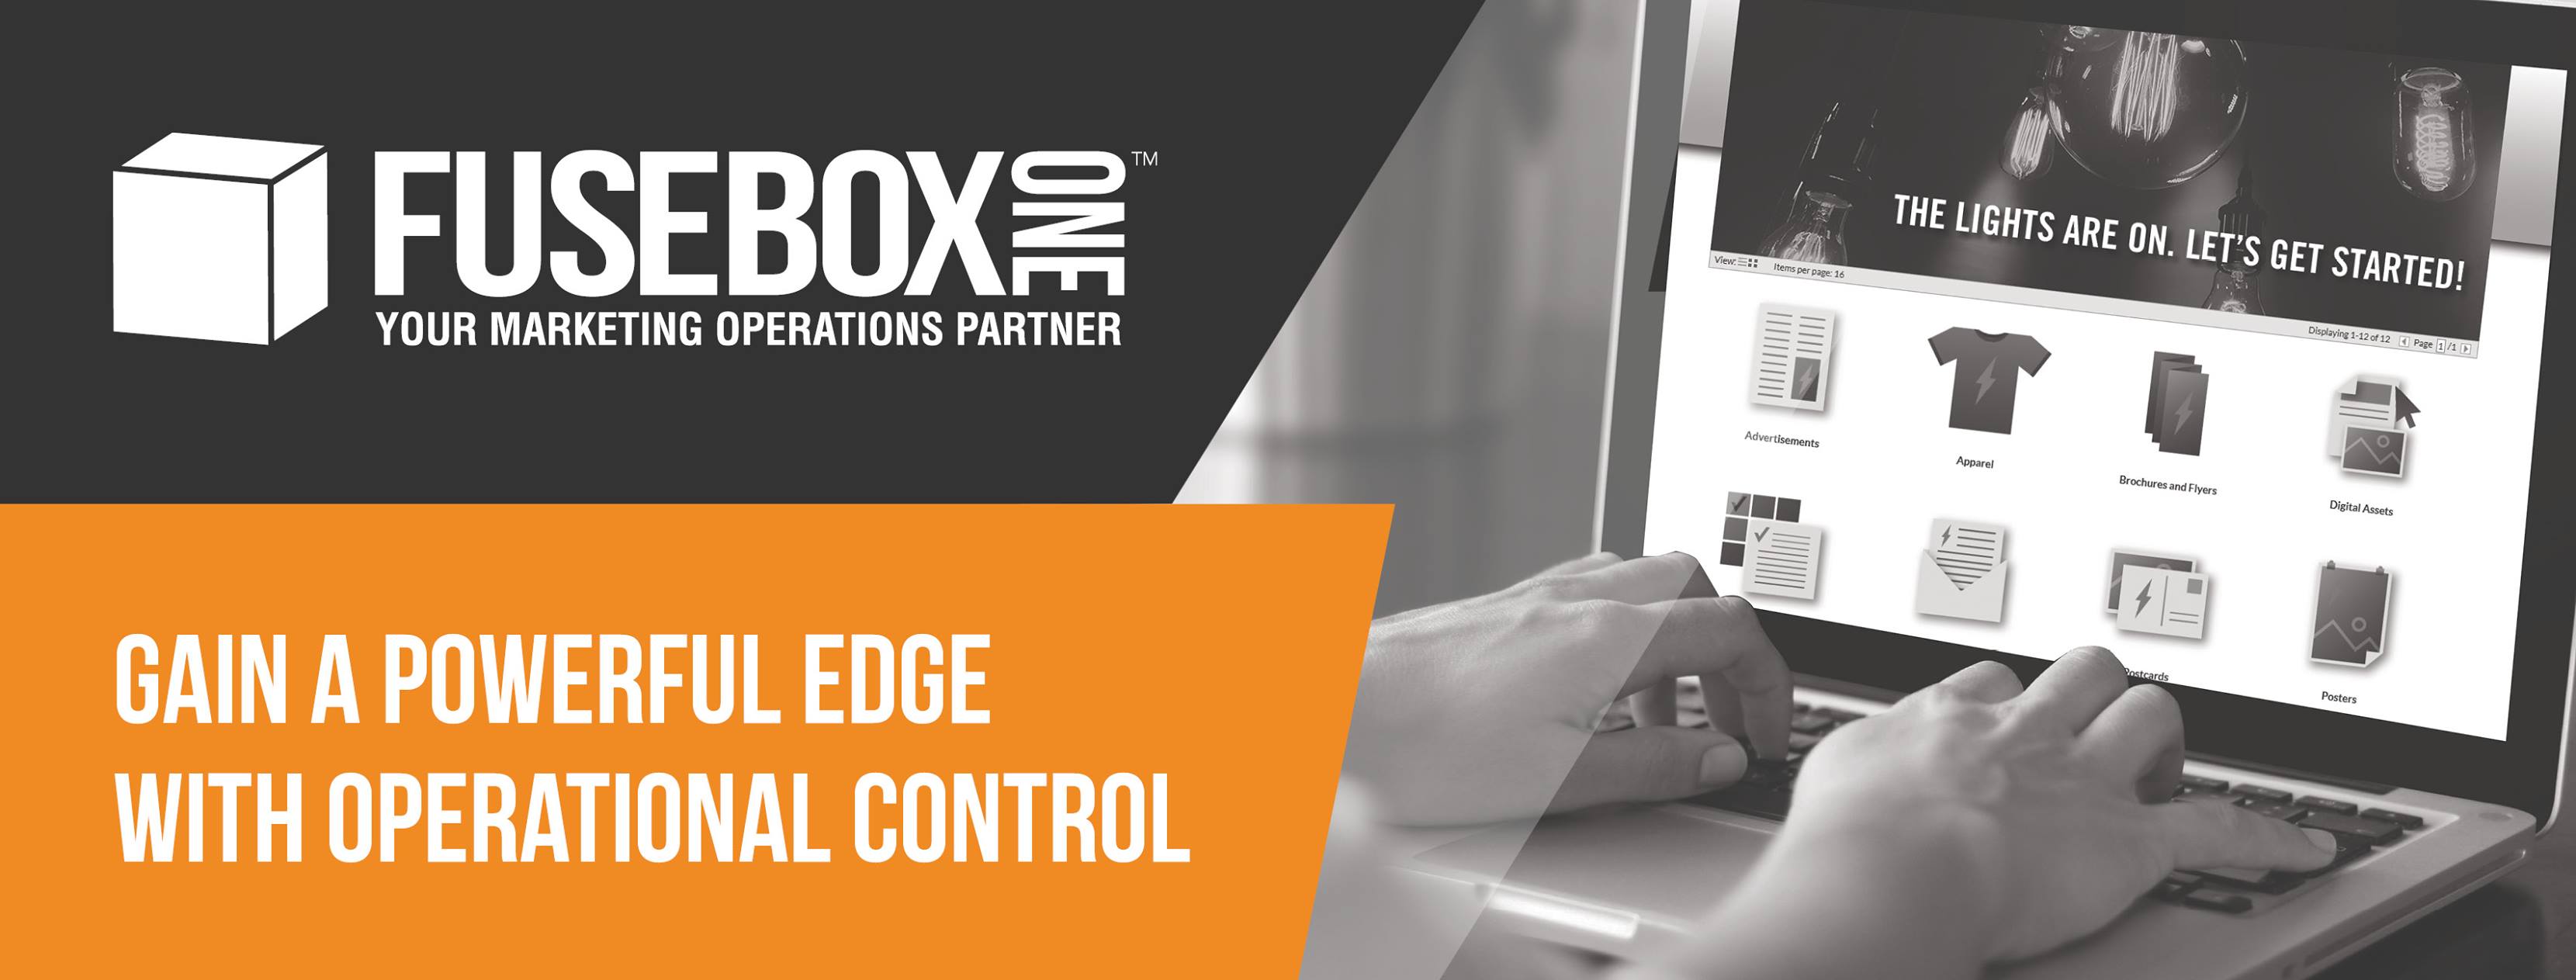 FuseBox One Rolls Out Exciting New Alliance Referral Partnership Program